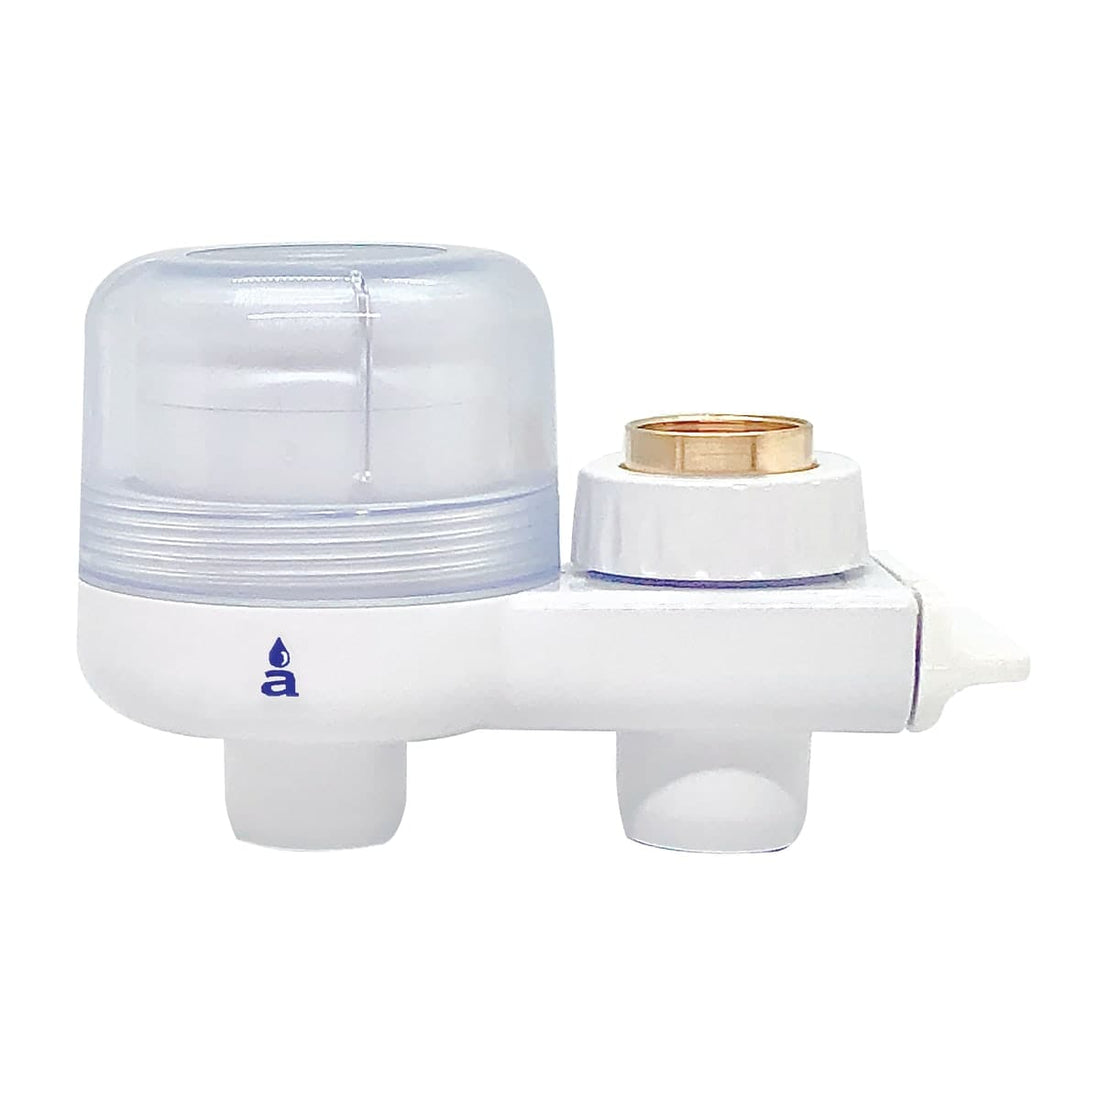 ACUACOMPACT COMPLETE KIT WHITE WATER FILTER FOR TAP